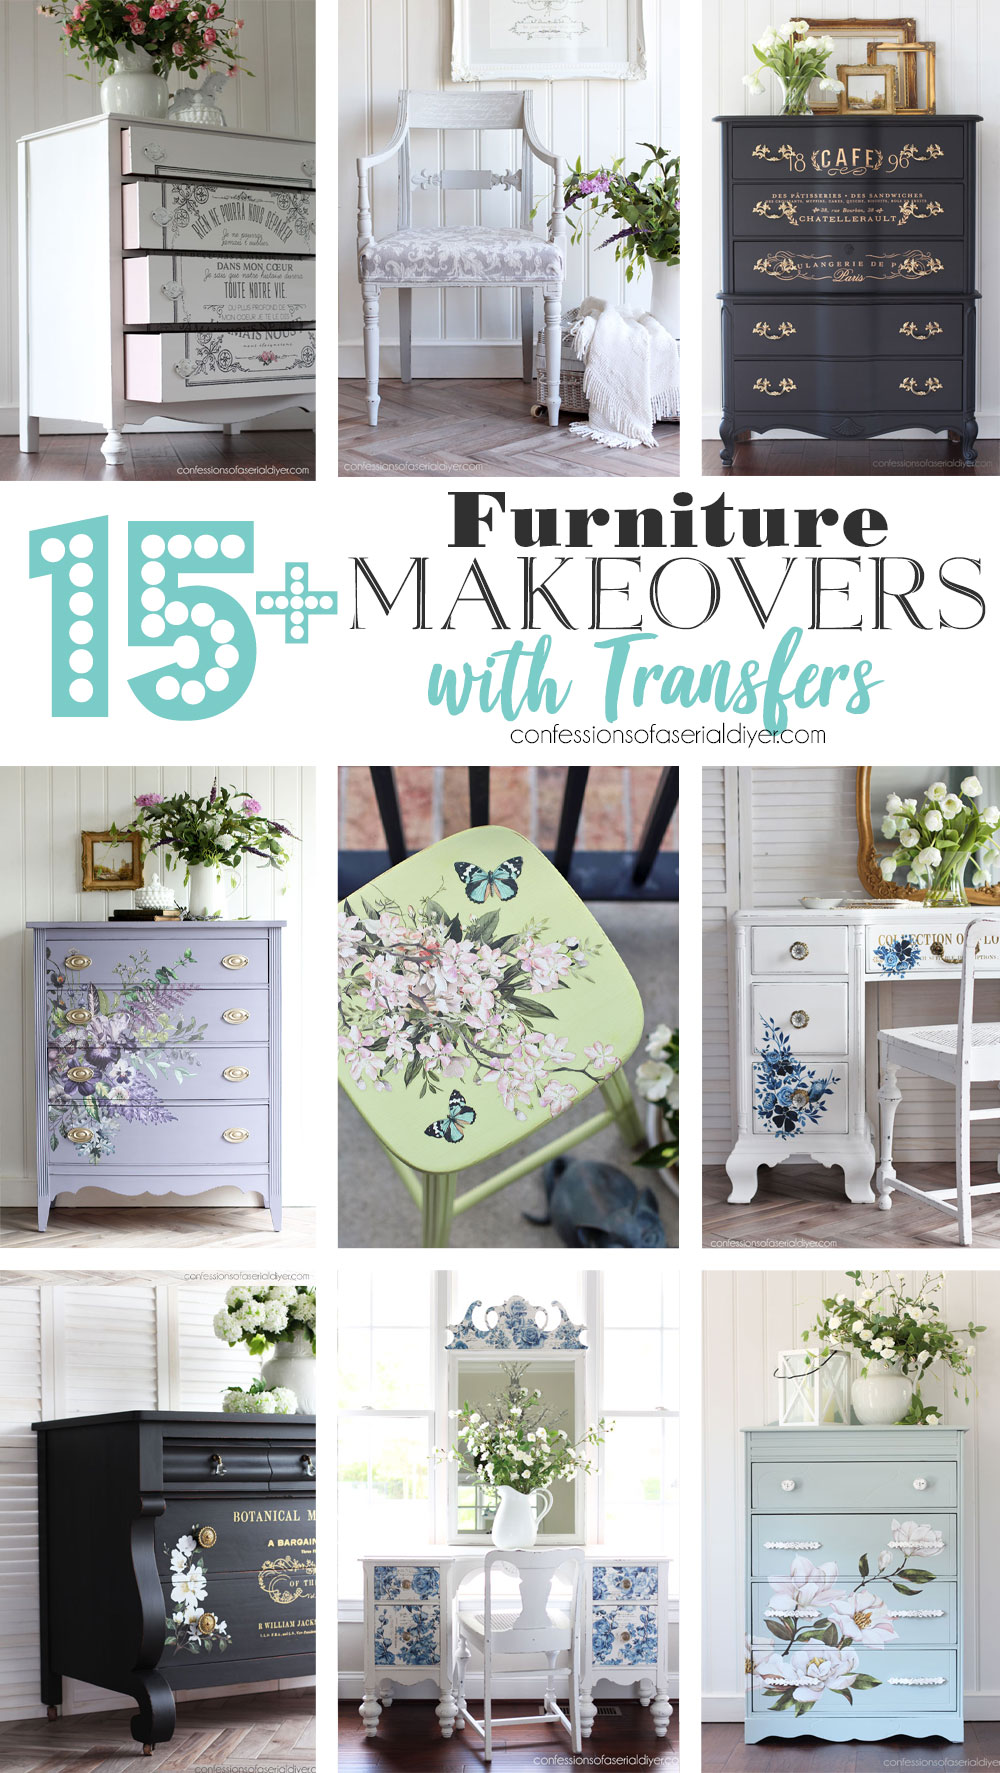 15+ Fabulous Furniture Makeovers with Transfers